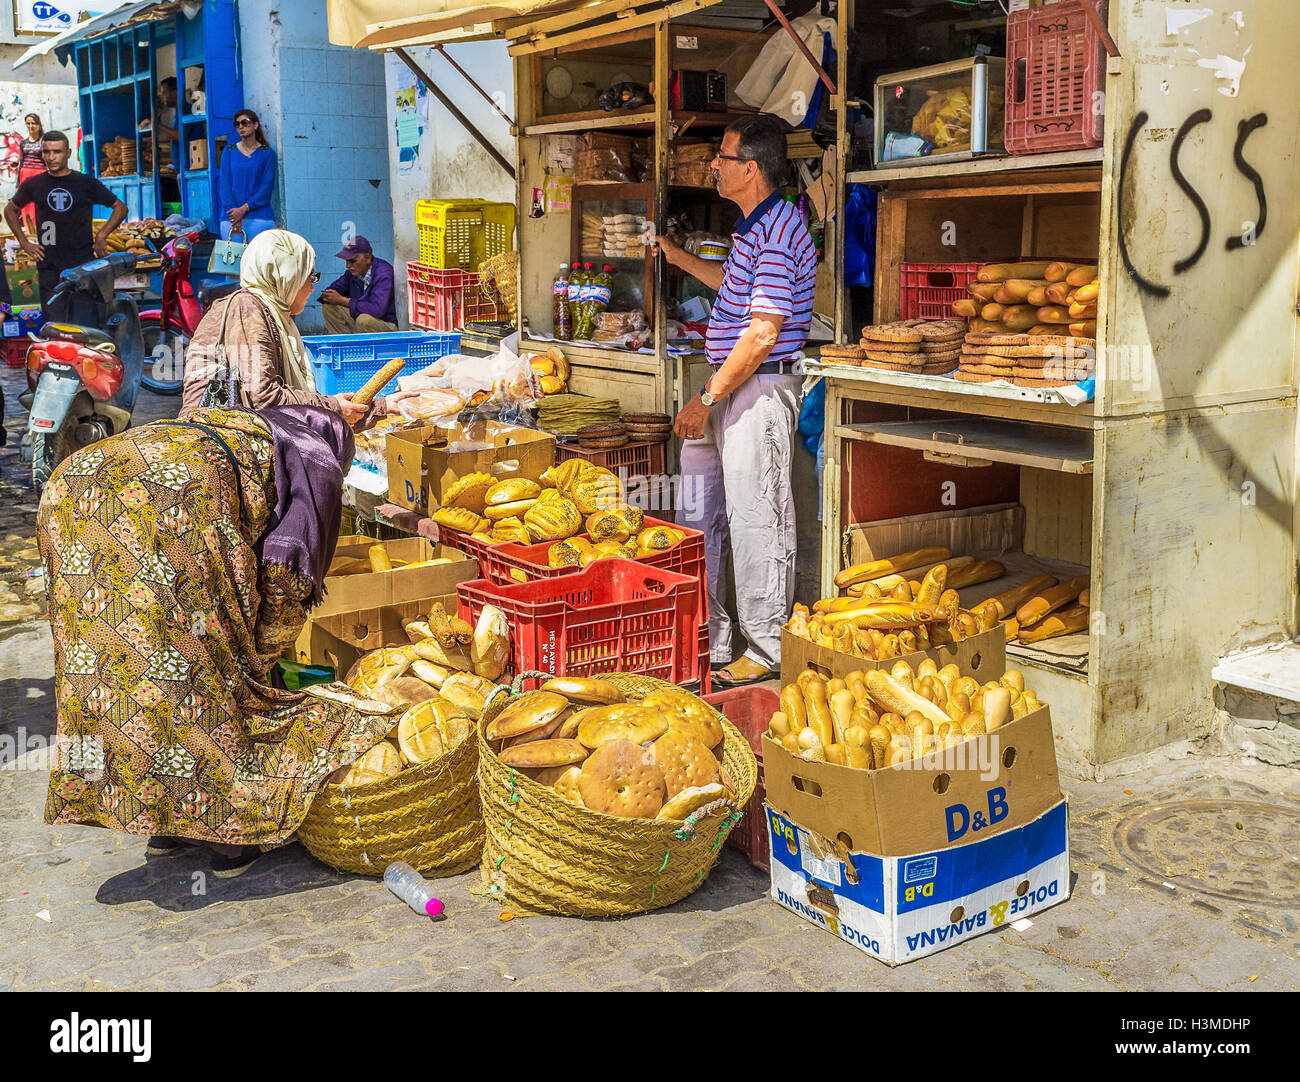 The locals chose the freshest bread in a market stall in Sfax. Stock Photo